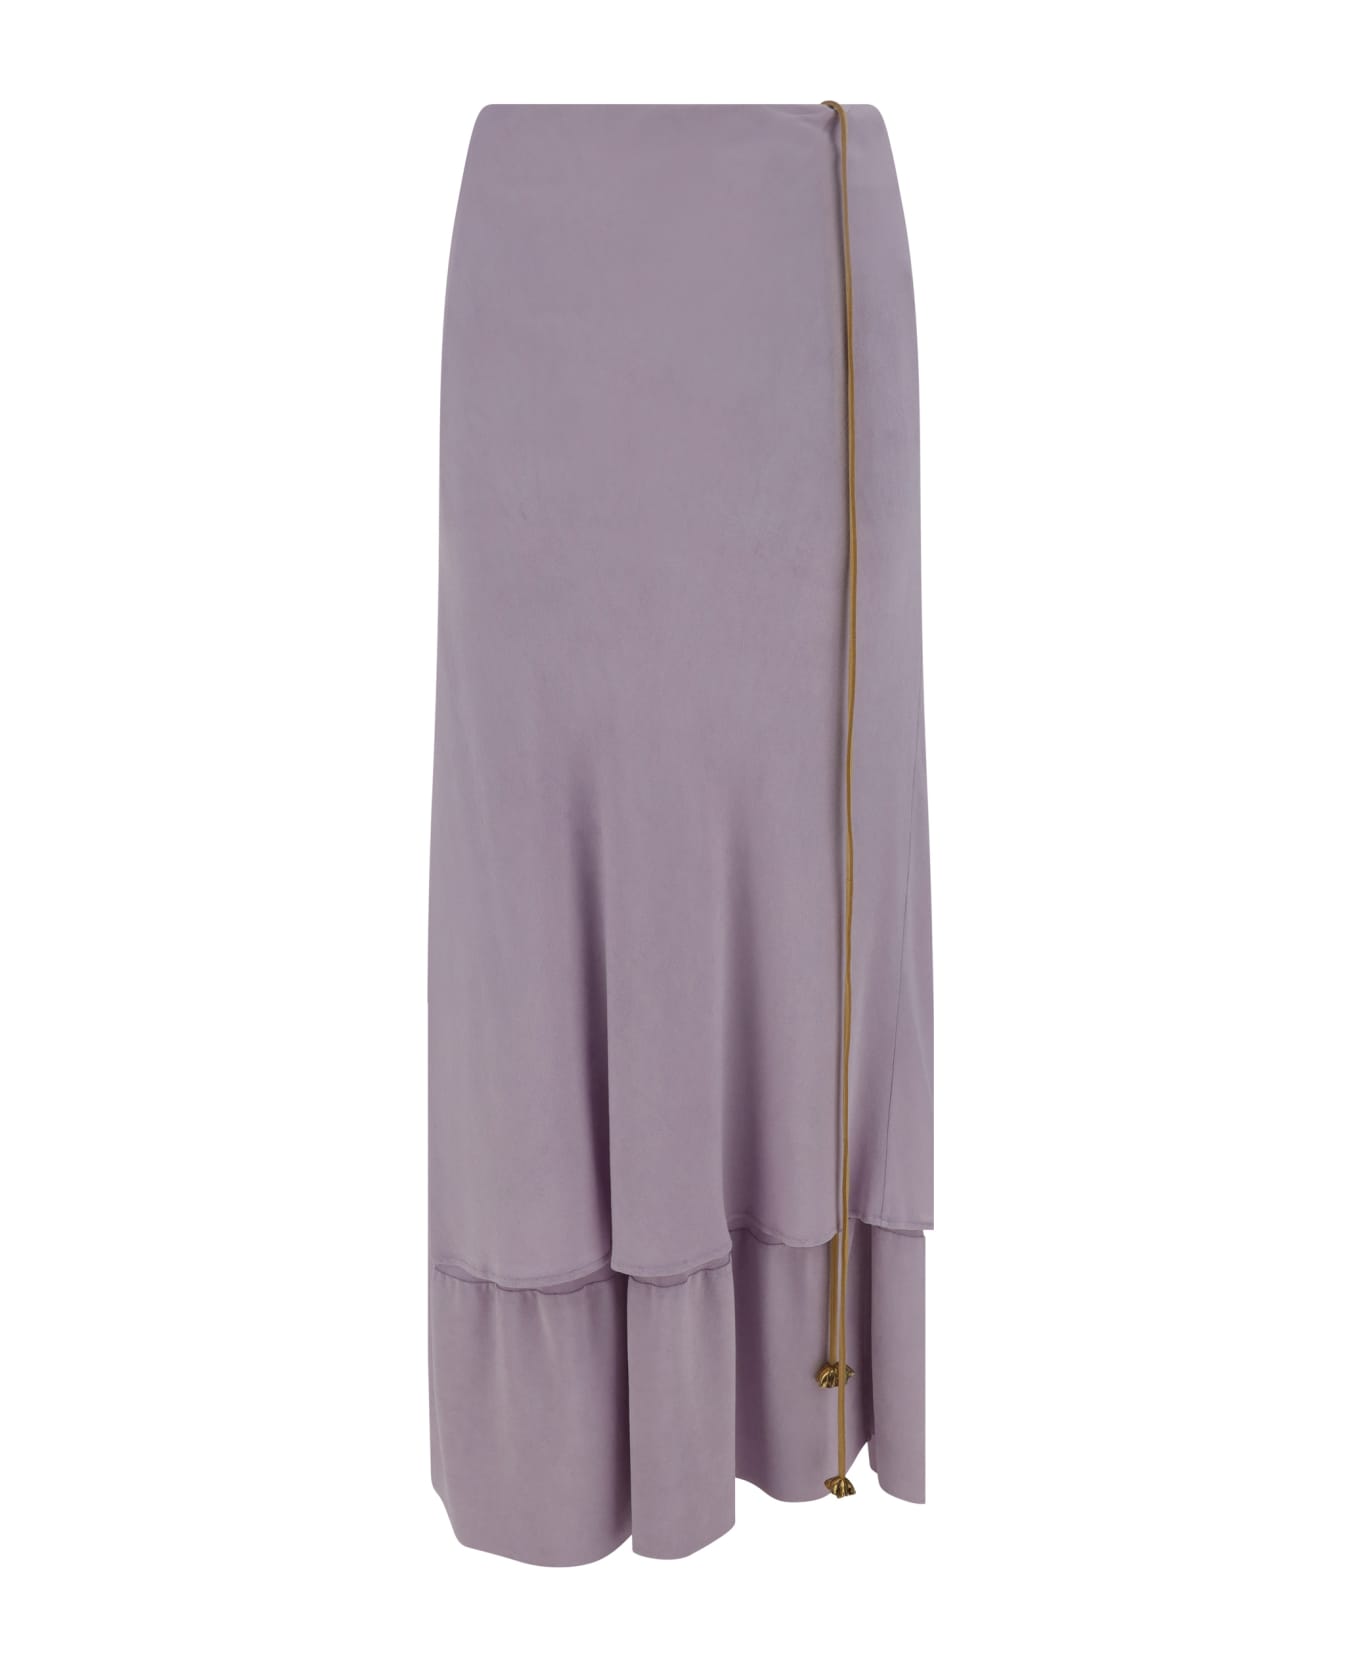 Quira Skirt - Misty Lilac